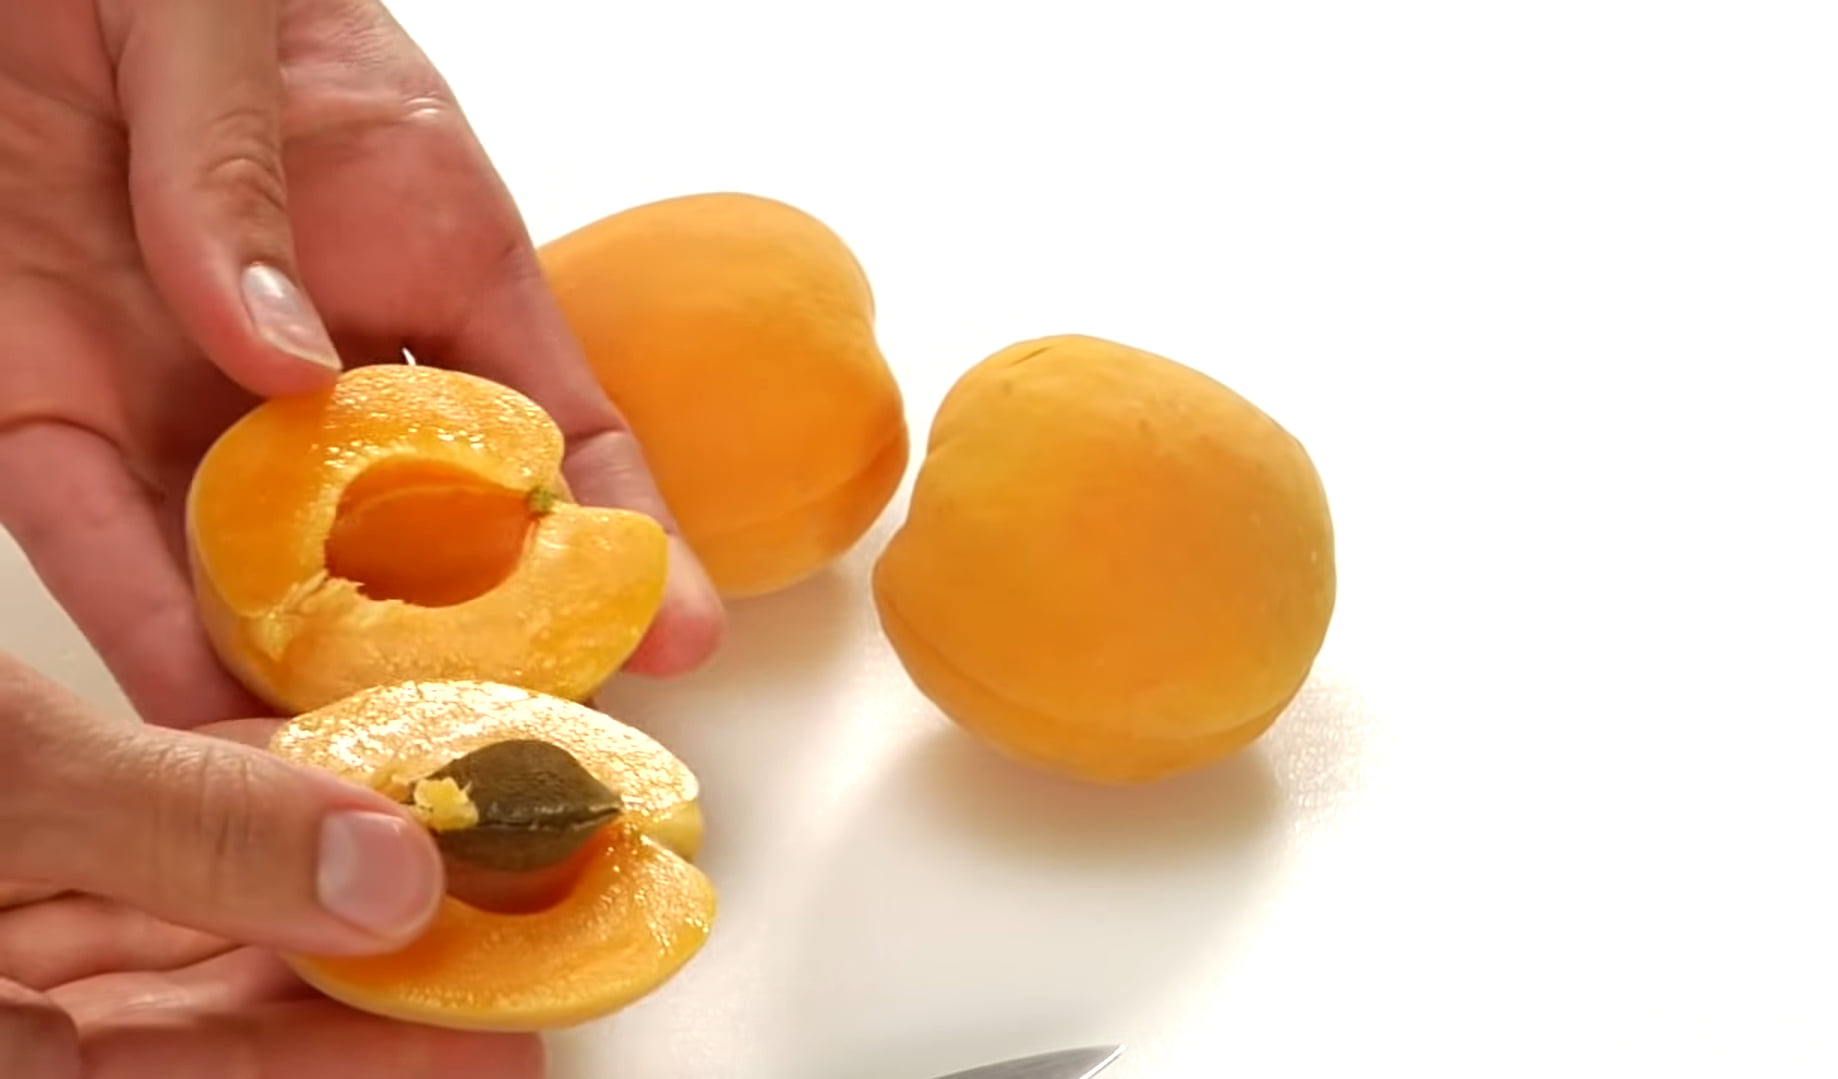 How to Prepare Apricots for Babies